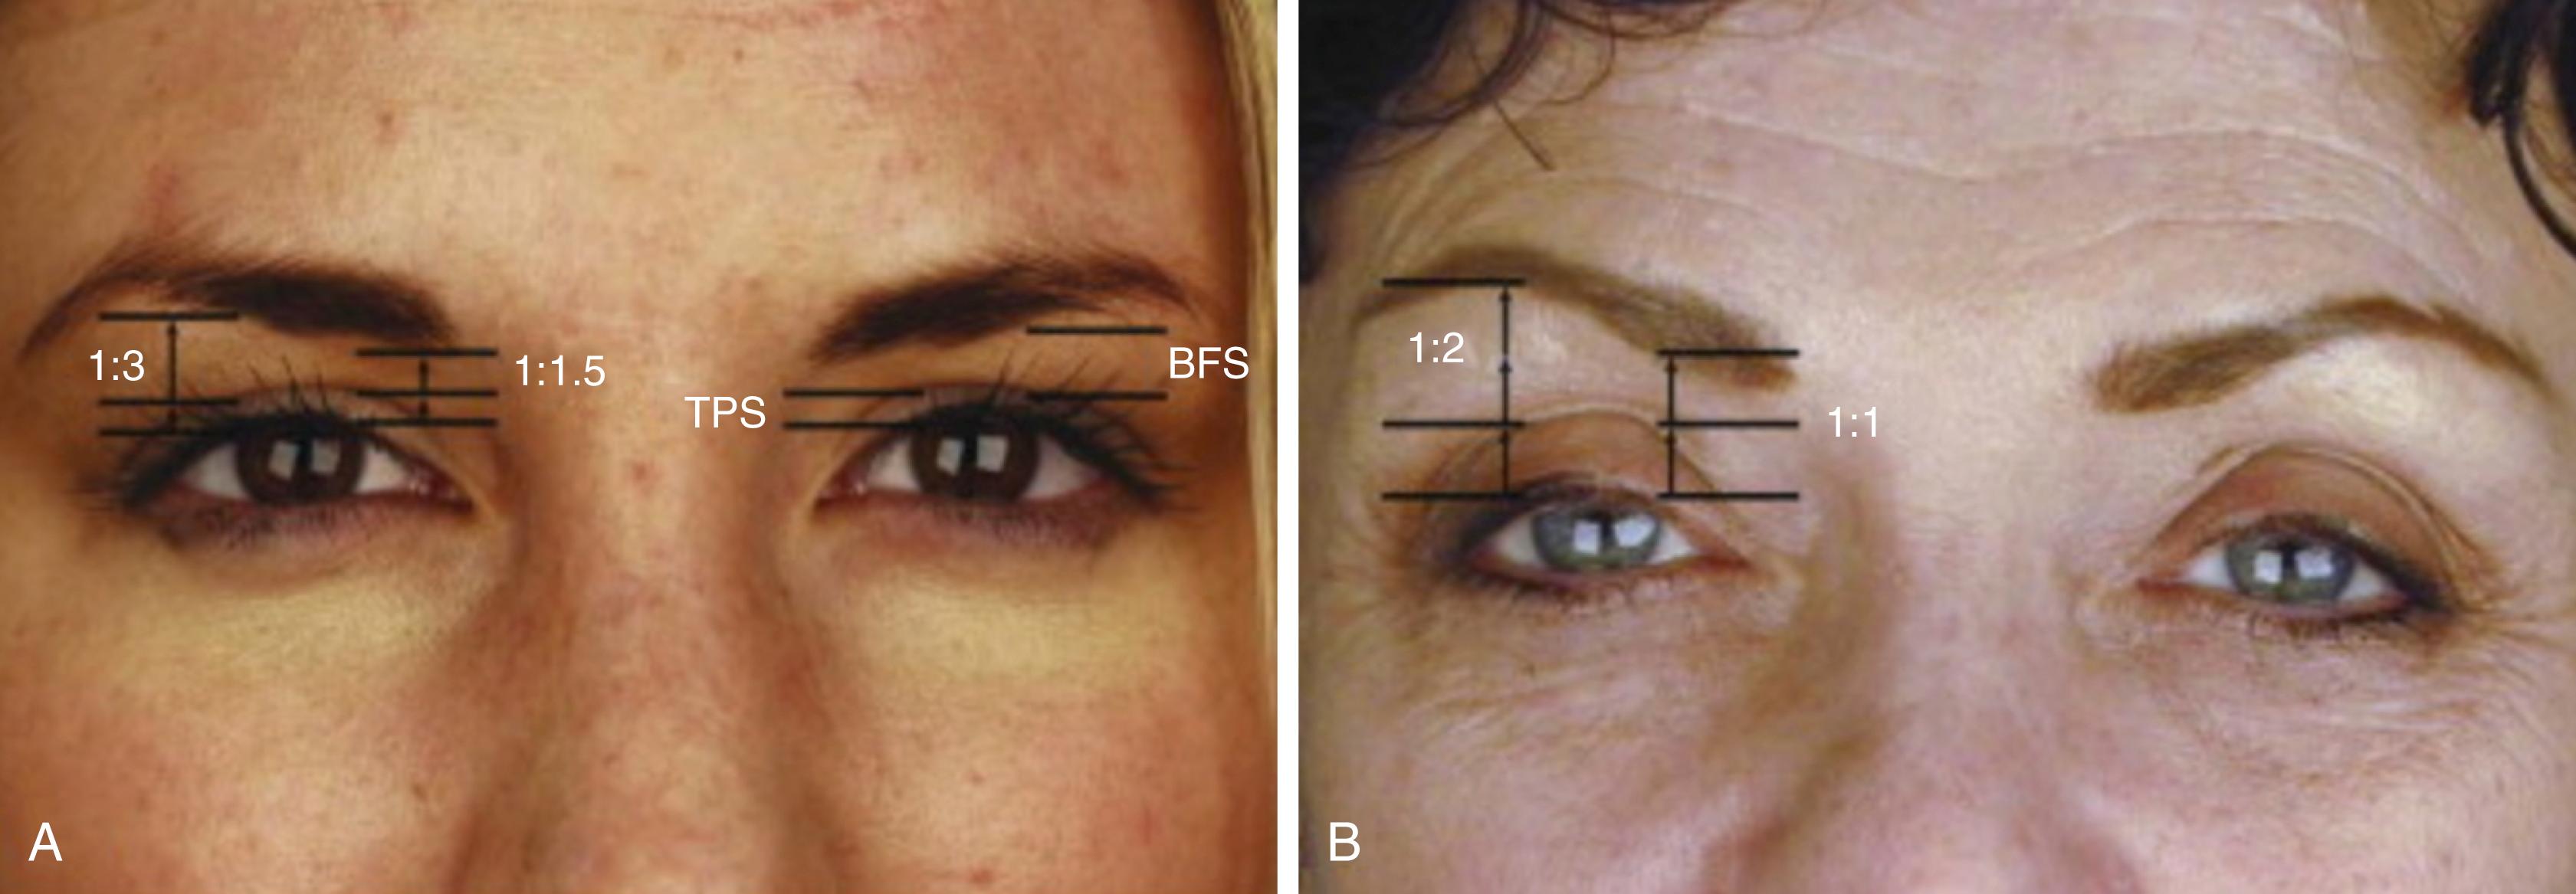 Fig. 64.1, (A) The tarsal platform show (TPS) is the distance from the lash line to the upper lid crease. The brow–fat span (BFS) is the distance between the lid crease and inferior edge of the brow. The youthful TPS to BFS ratio is 1:1.5 medially and 1:3 laterally. (B) With age, bone, and soft tissue loss around the eye increases the amount of TPS and decreases the BFS. In some patients, this can give the illusion of brow ptosis, when in fact the actual distance of the brow from the lash line is the same or even increased.